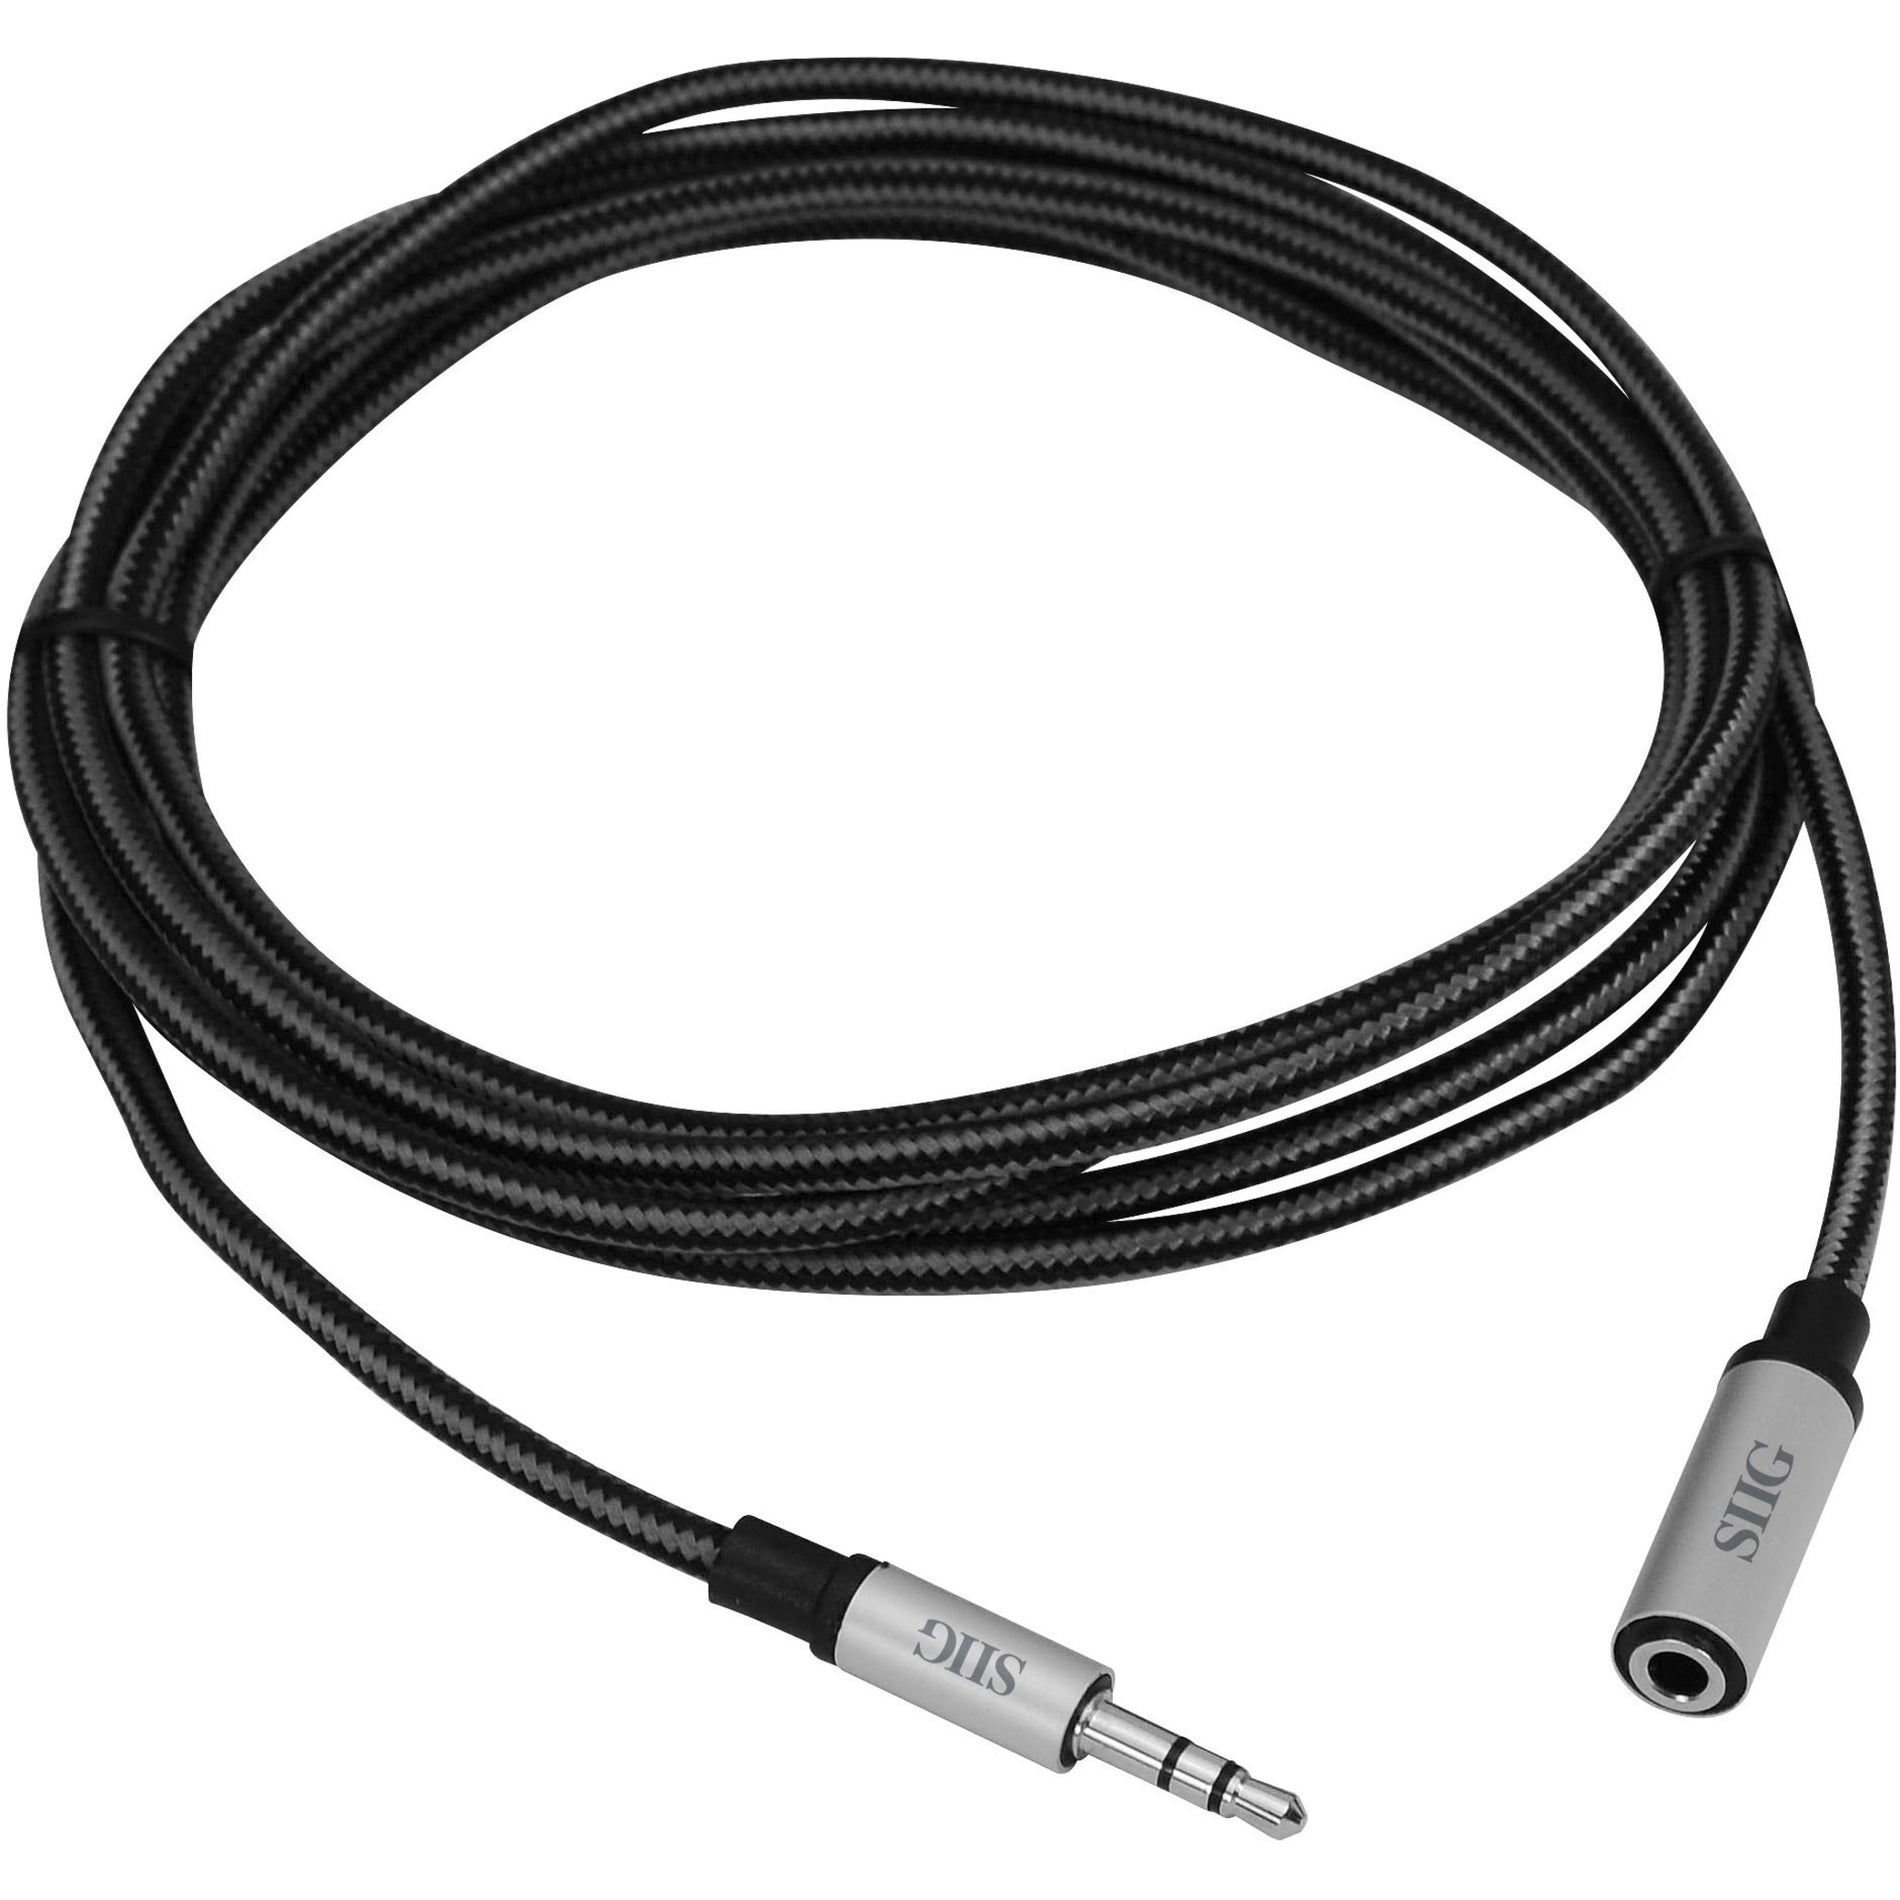 SIIG CB-AU0C12-S1 Woven Fabric Braided 3.5mm Stereo Aux Cable (M/F) - 2M, Tangle-Free, Loss-Less Audio, Durable